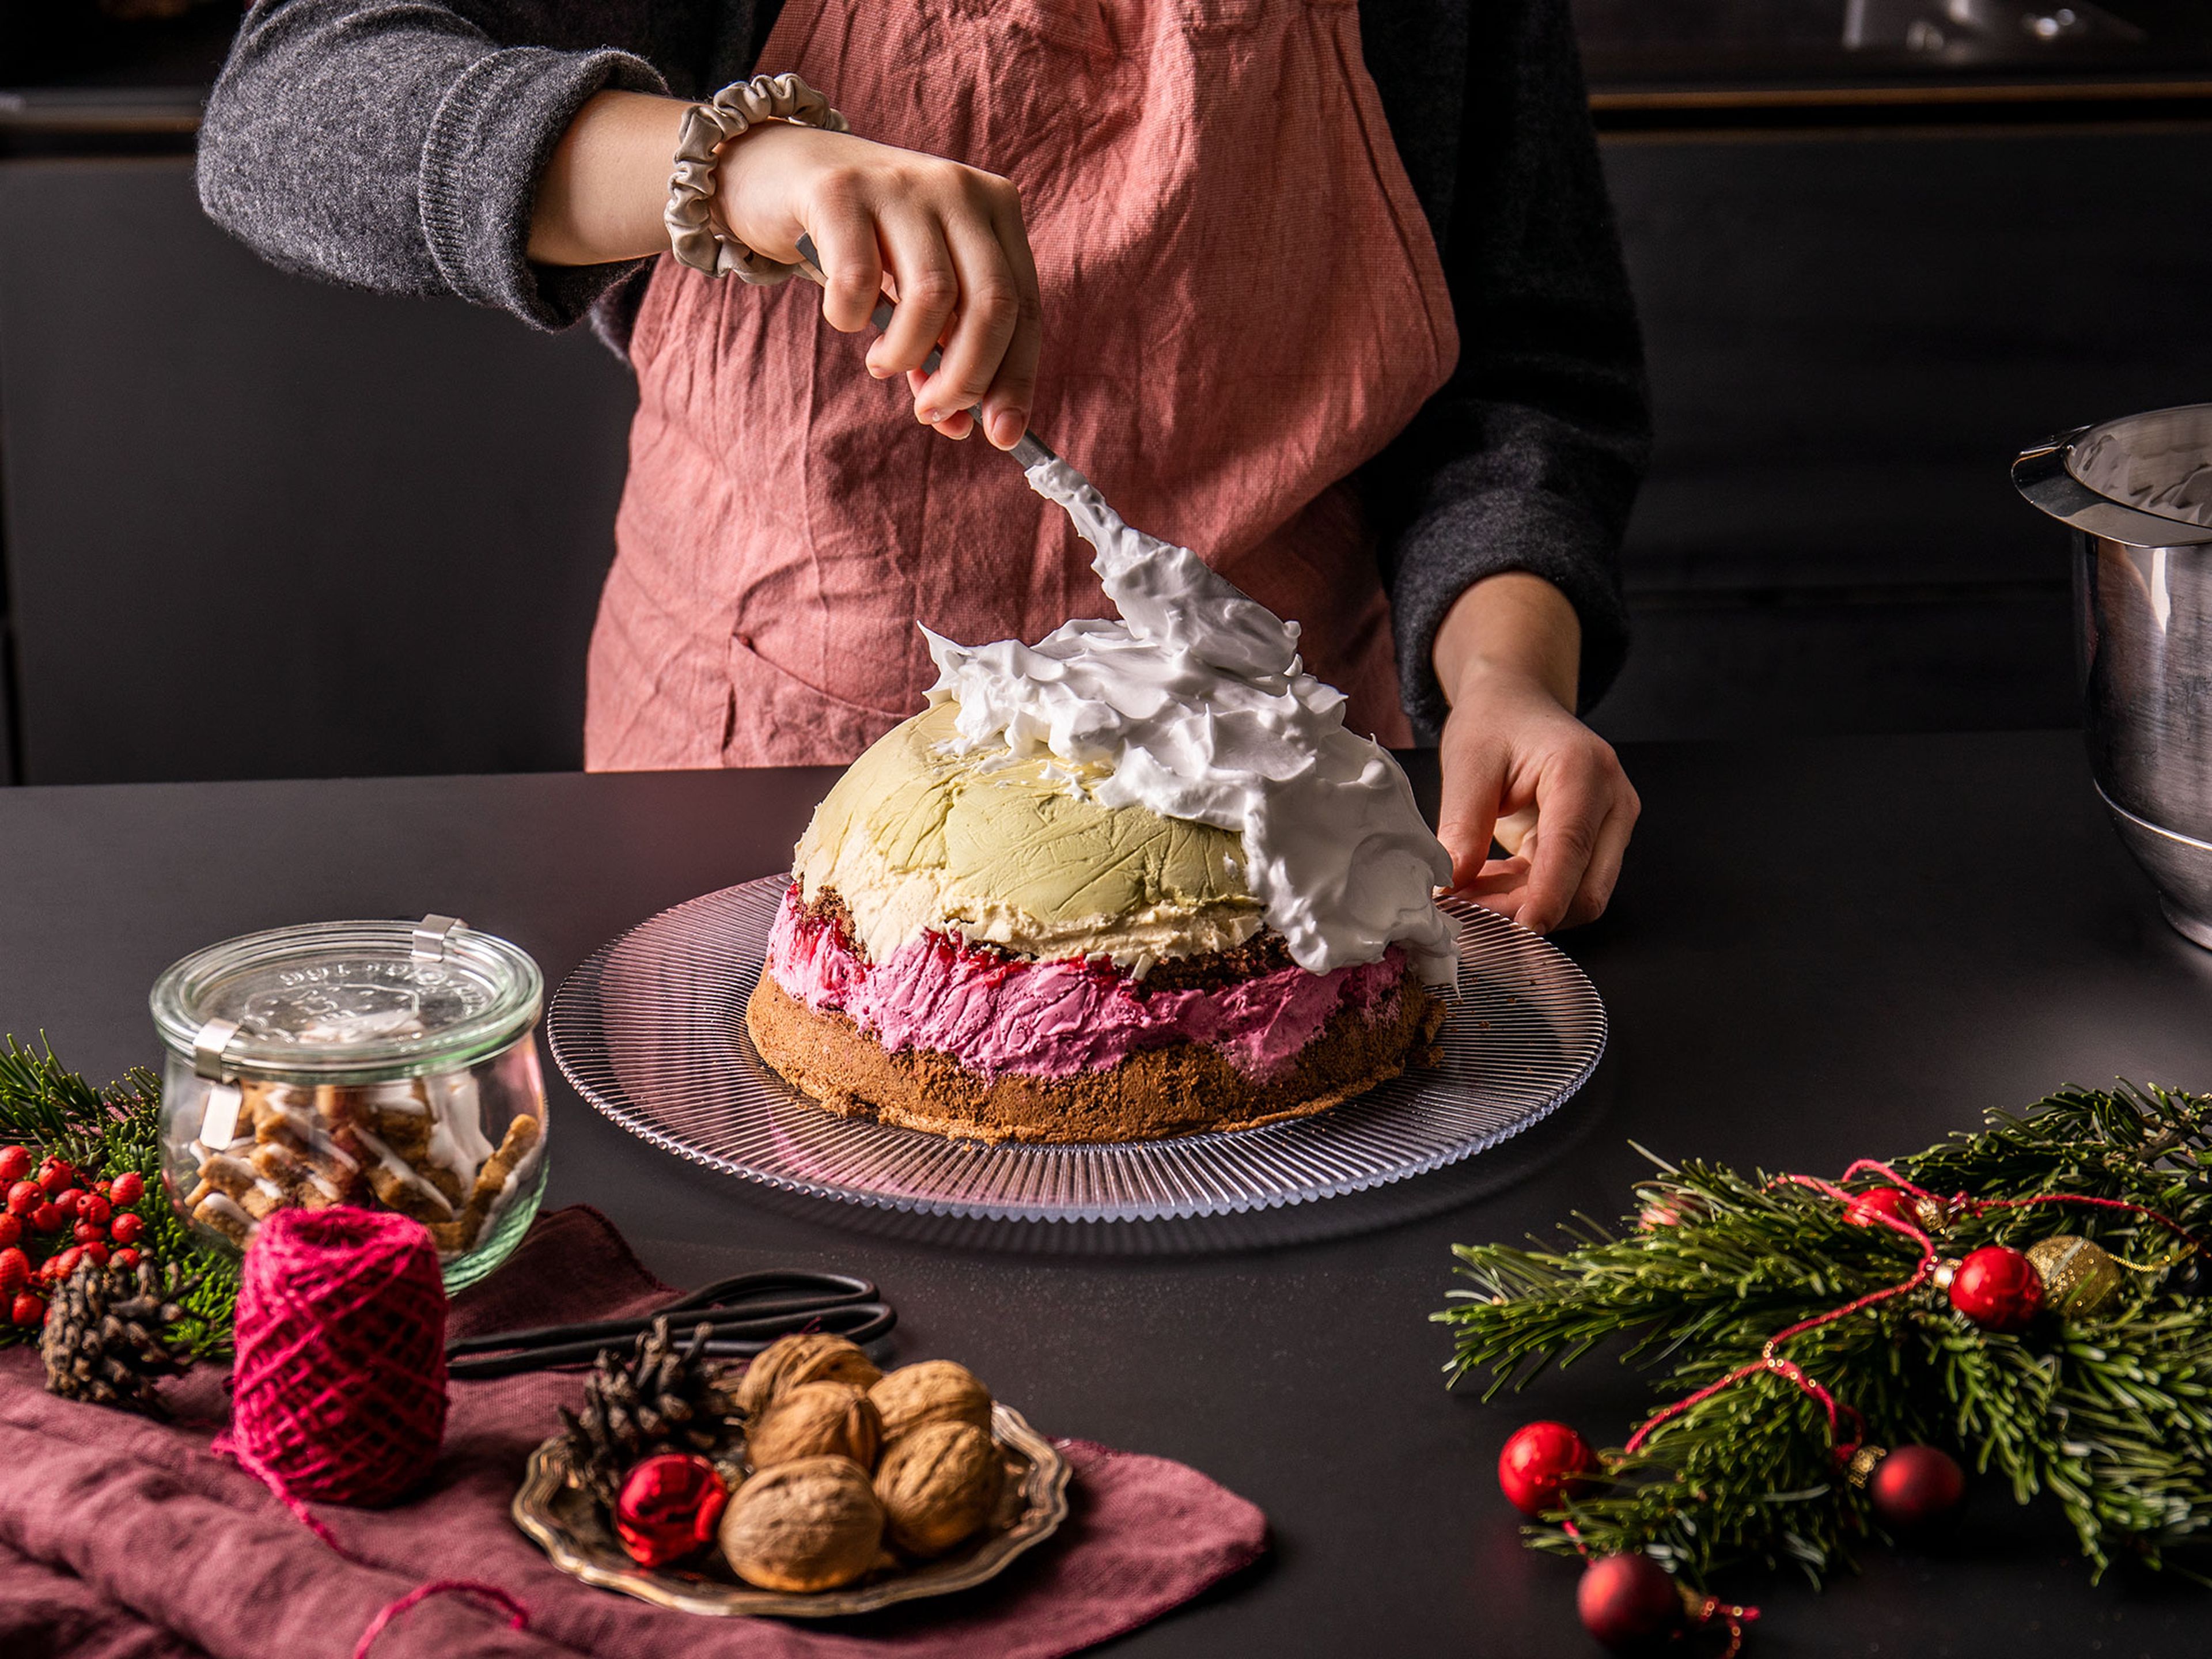 Spoon raspberry schnapps over the meringue and careful flambée by using a kitchen torch or a long match. Alternatively, you can bake in the oven at 200°/400°F for 8-10 min, or until golden. Enjoy!